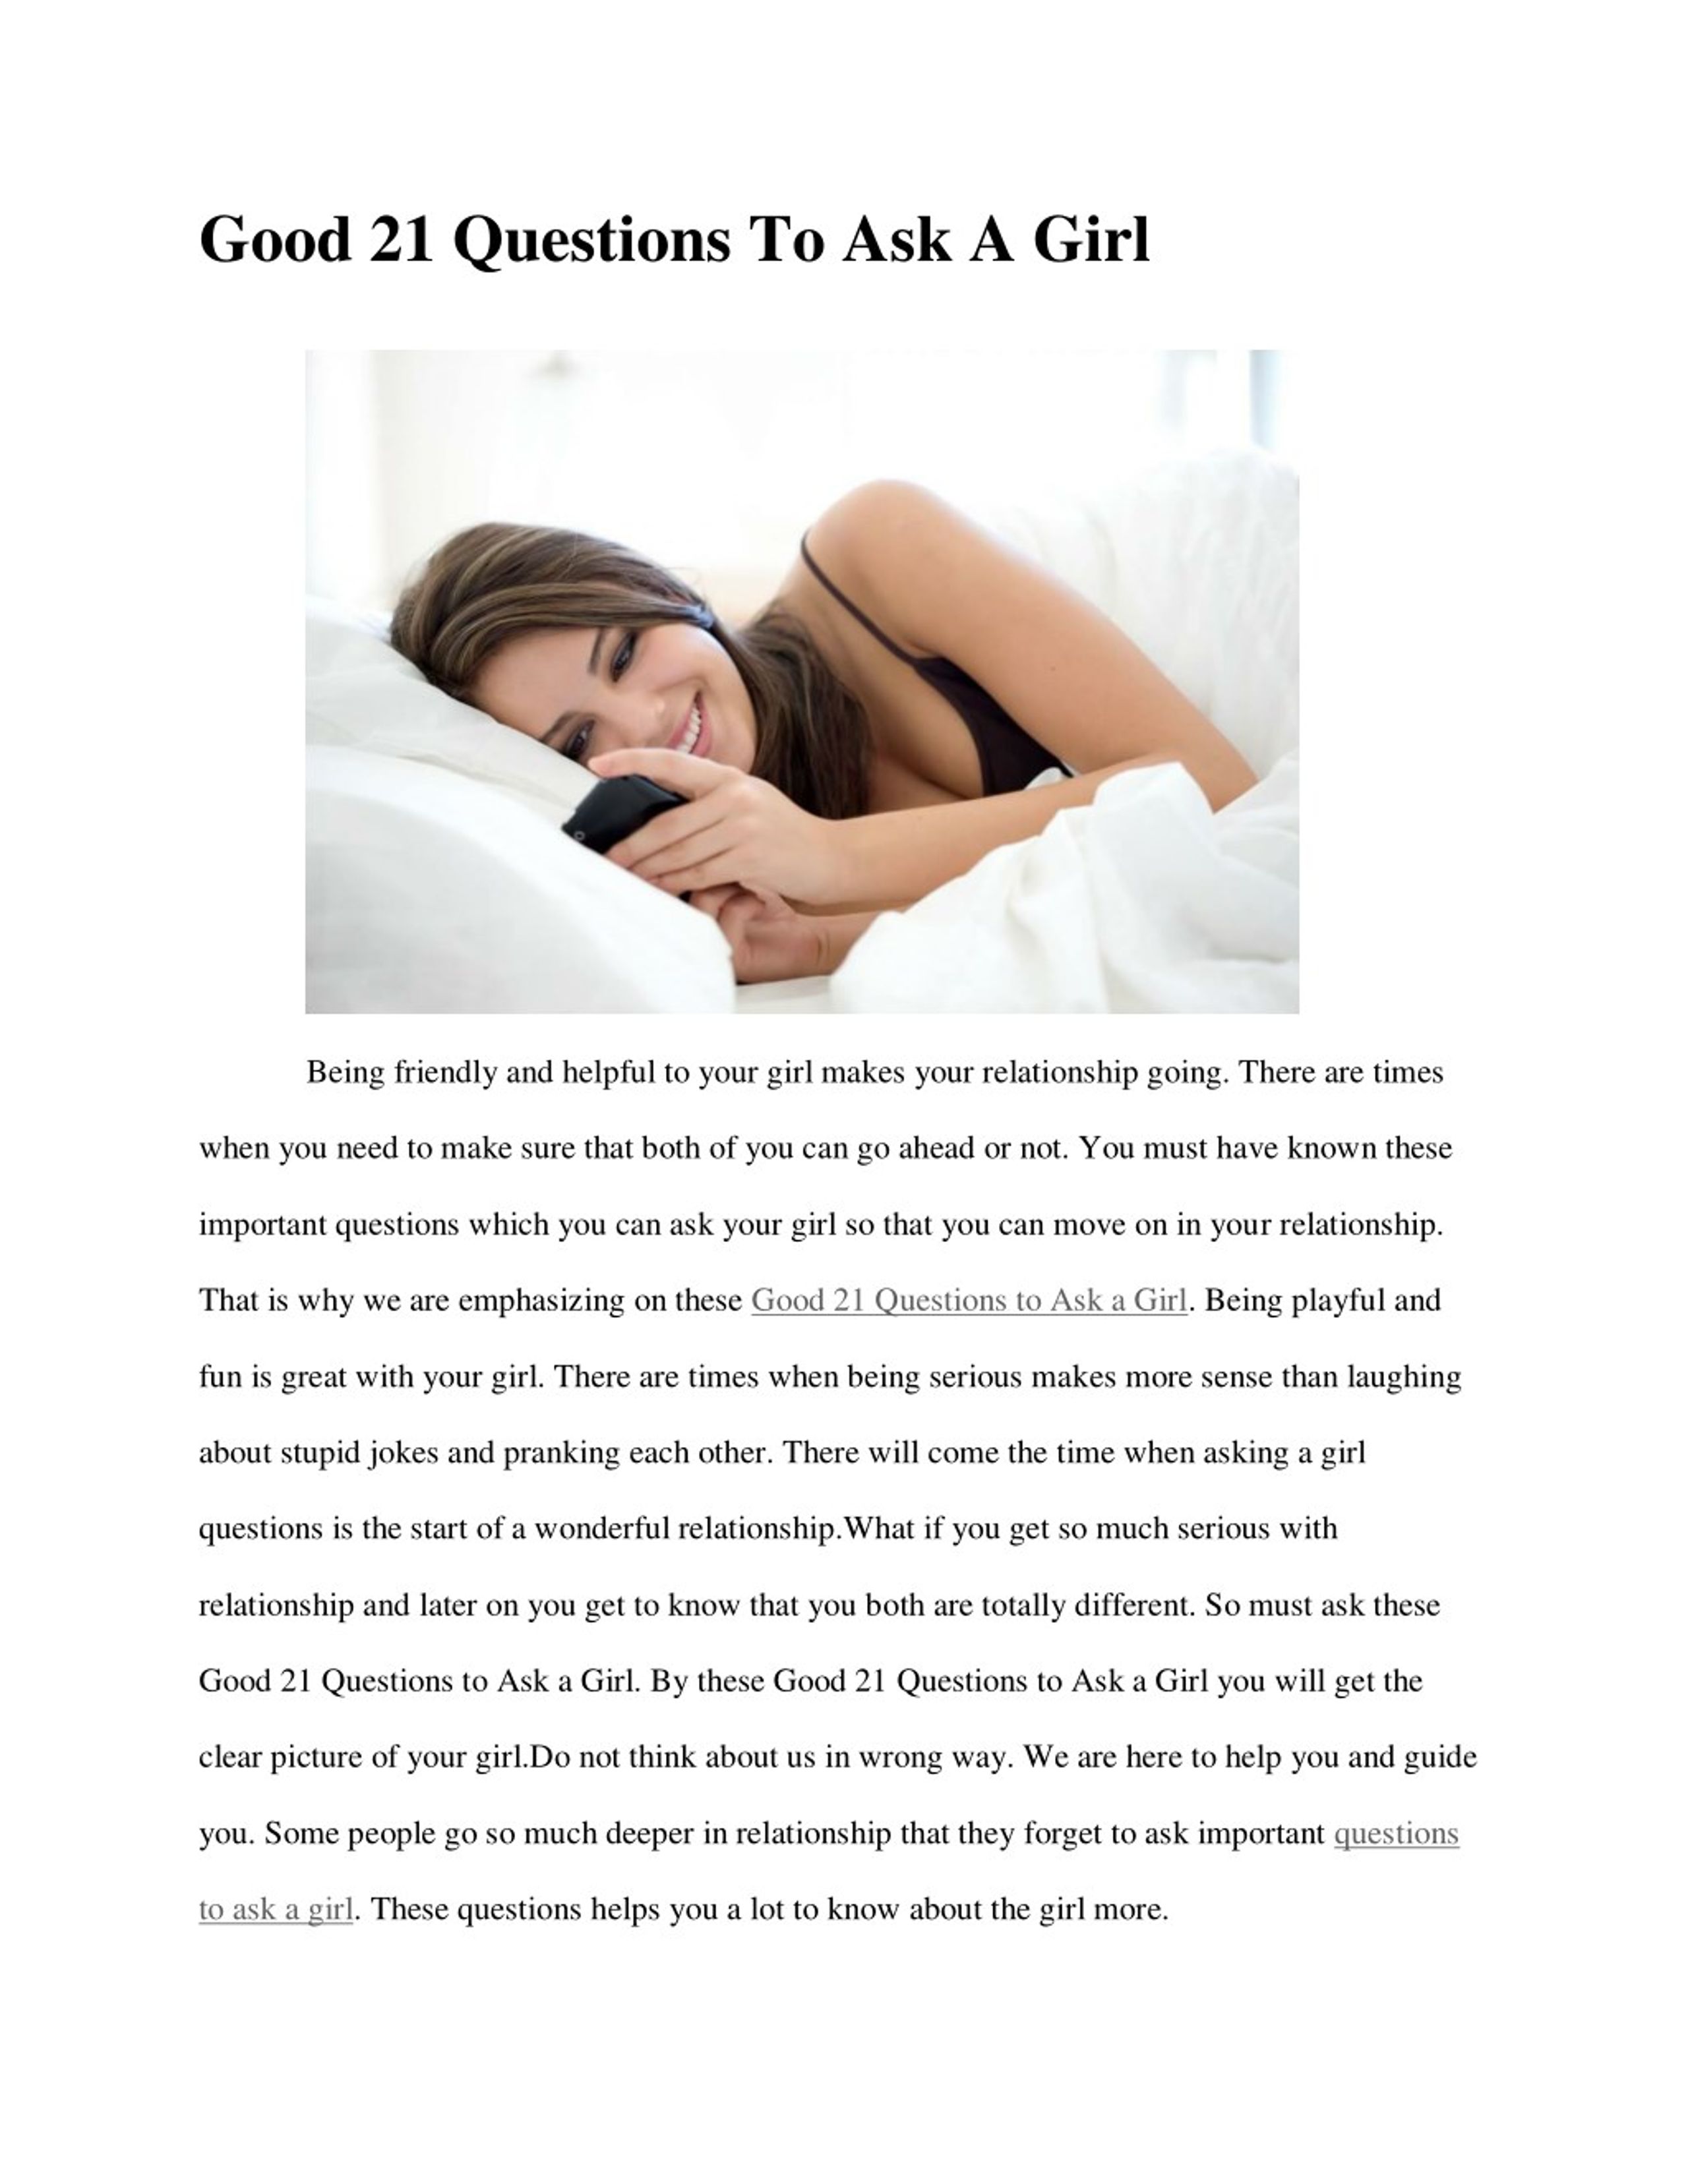 Here are 4 personal yet weird questions to ask a girl: Small groups or hug ...